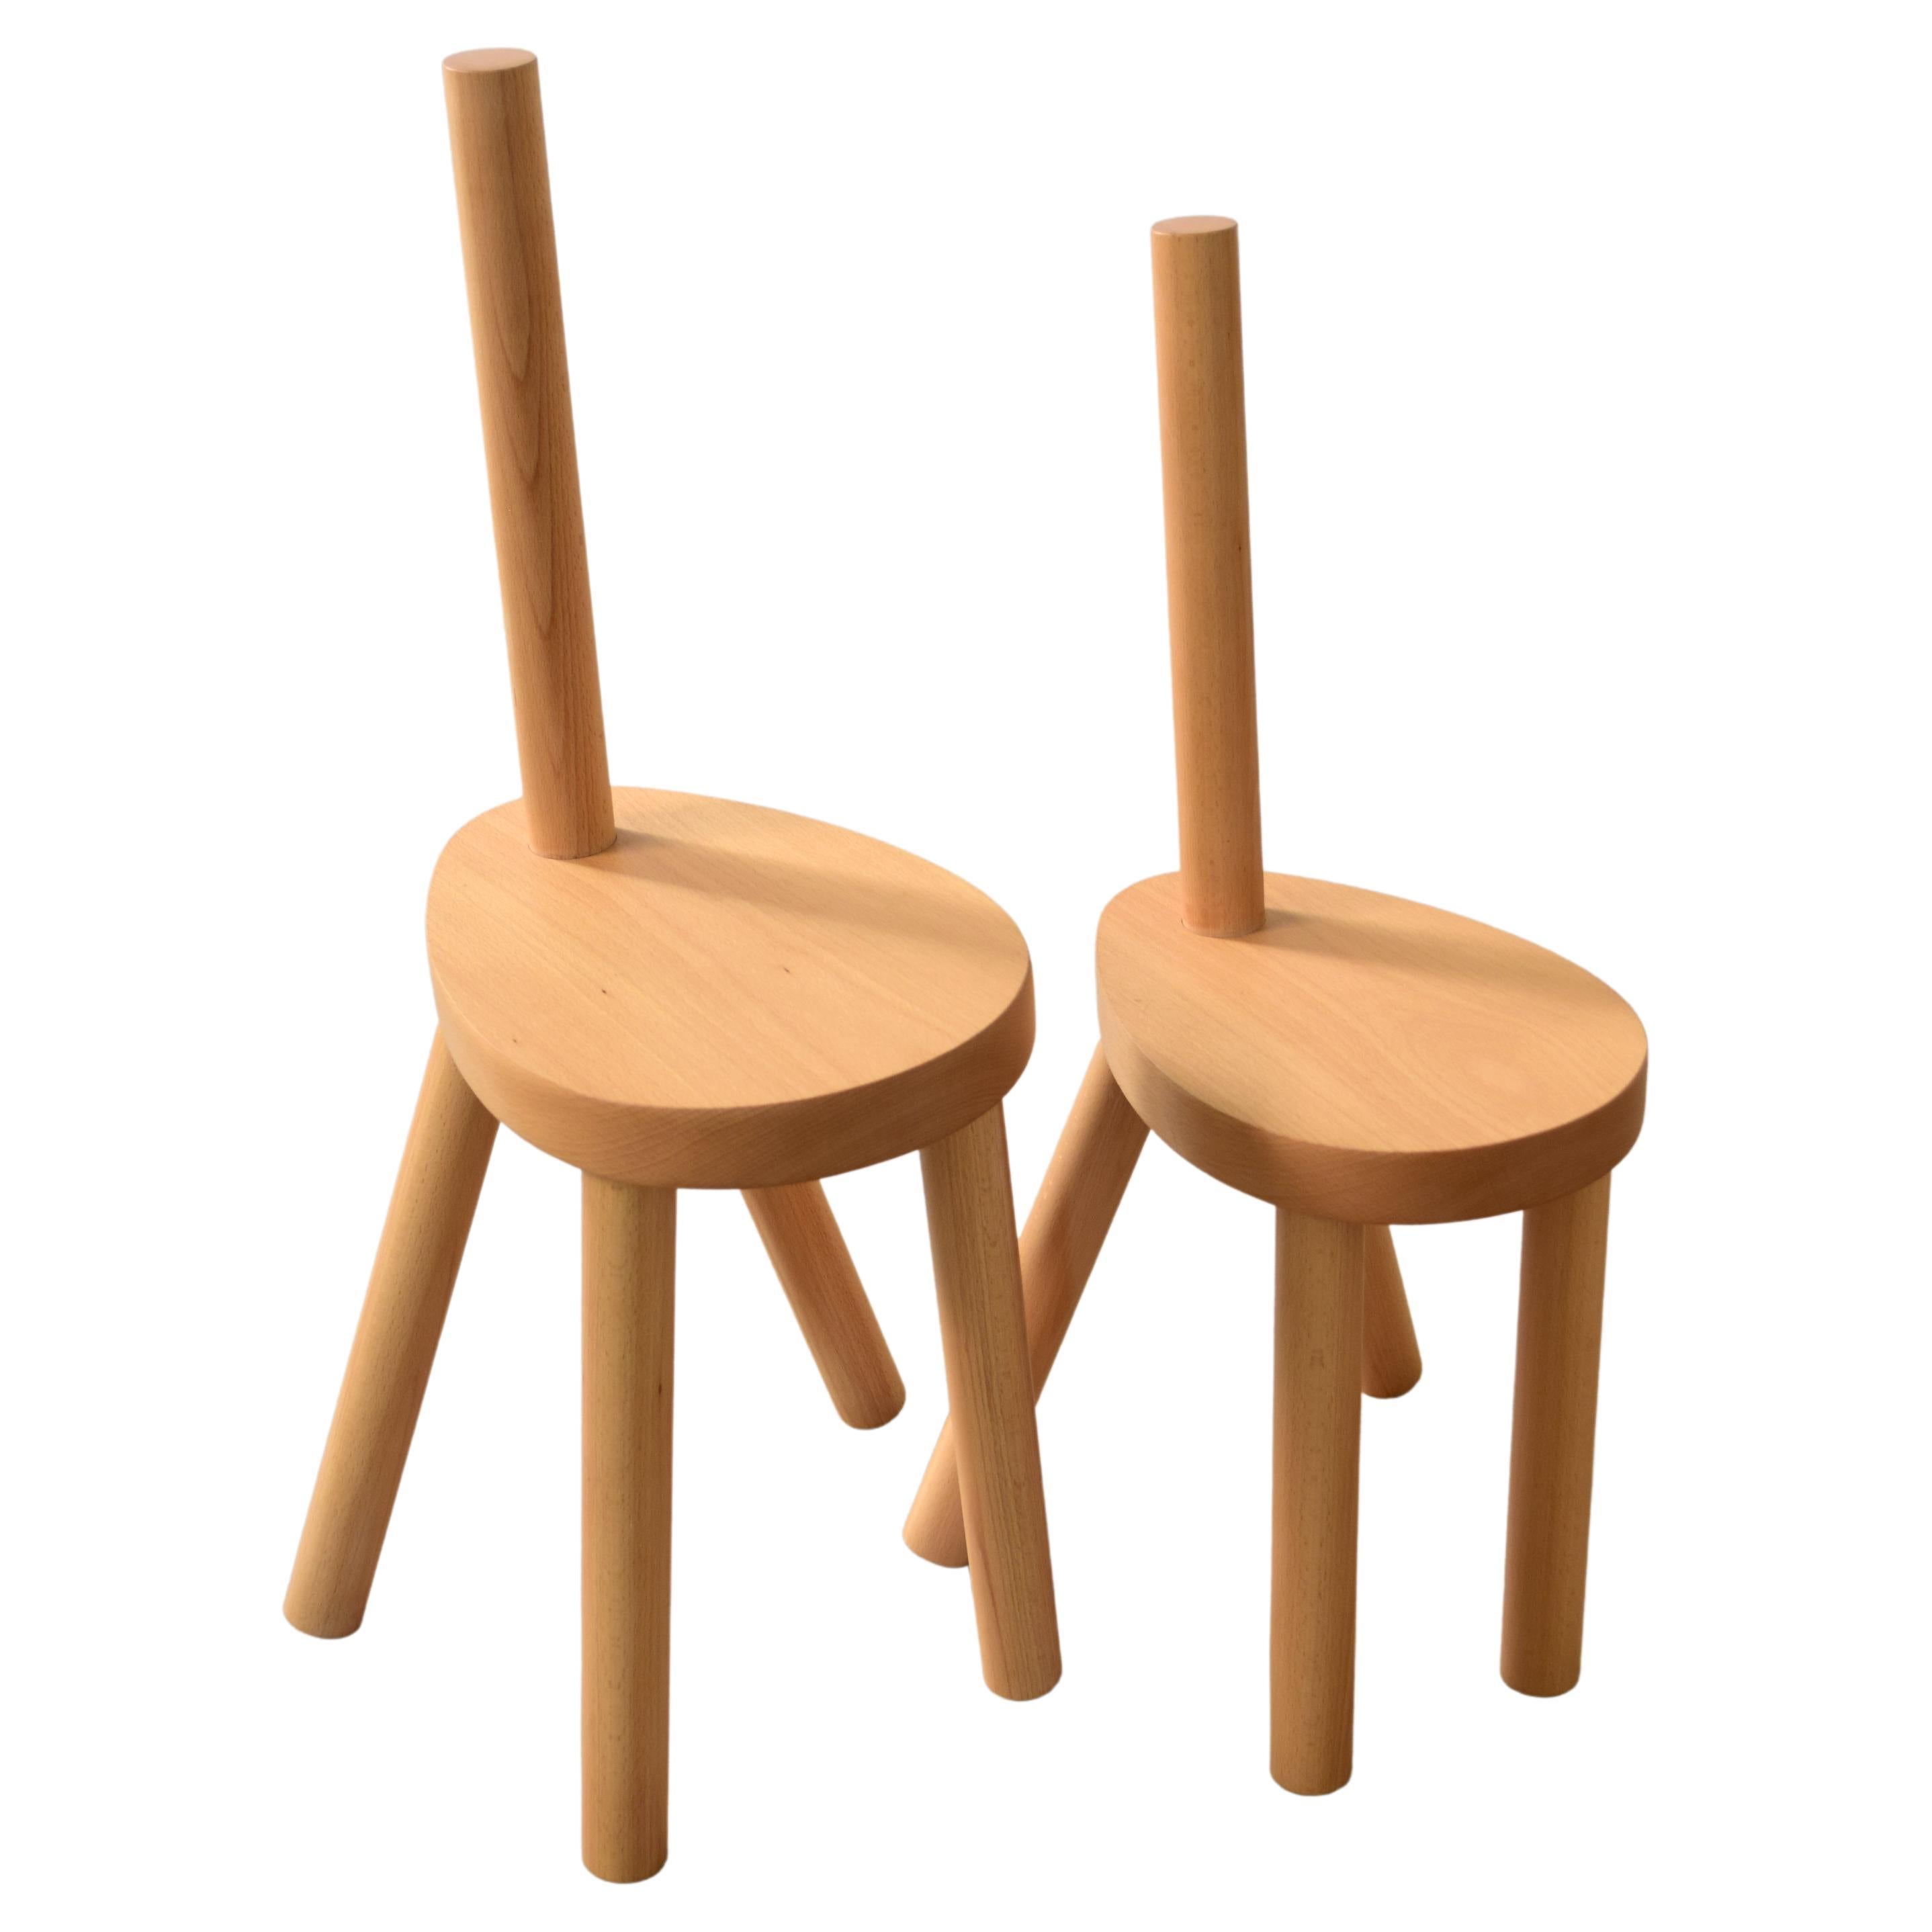 "Y" Chair 41cm Solid Beech Wood and Metal Joints